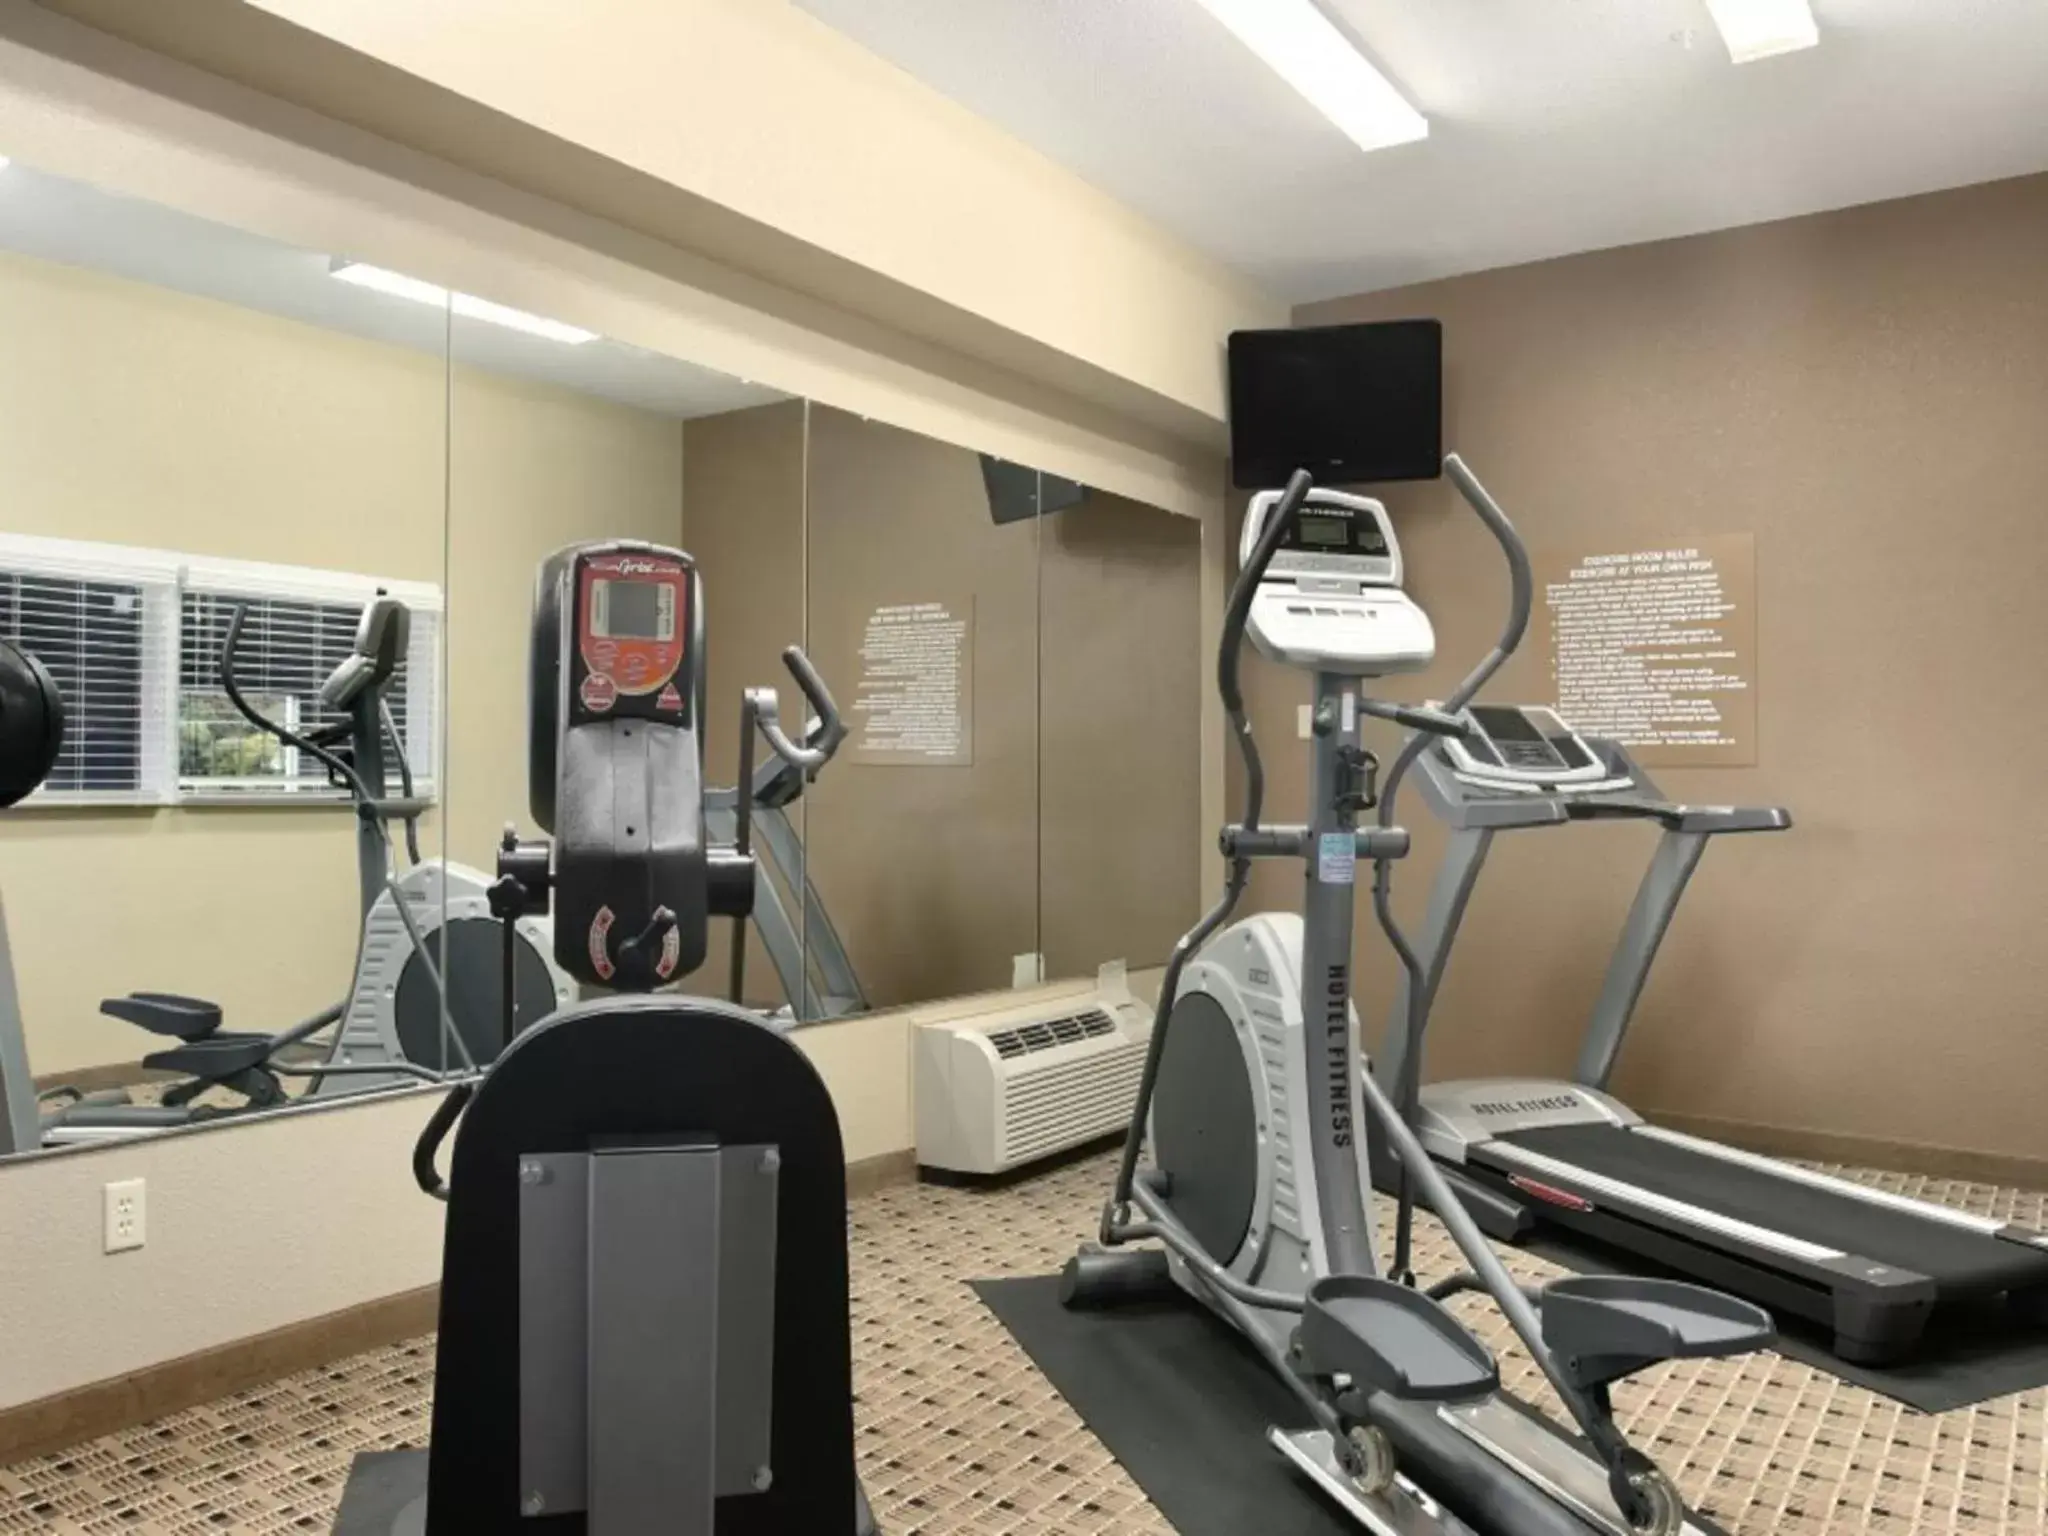 Fitness centre/facilities, Fitness Center/Facilities in Microtel Inn & Suites Mansfield PA